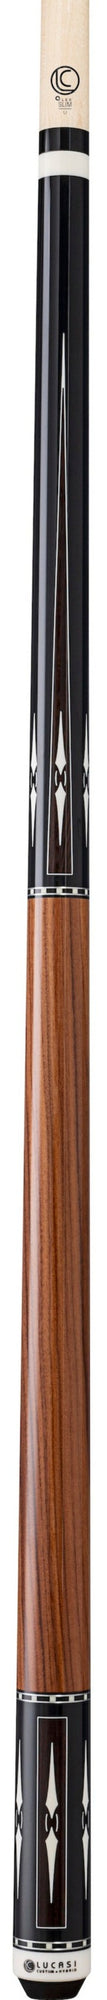 Lucasi Lucasi LUX70 Limited Edition Pool Cue Pool Cue